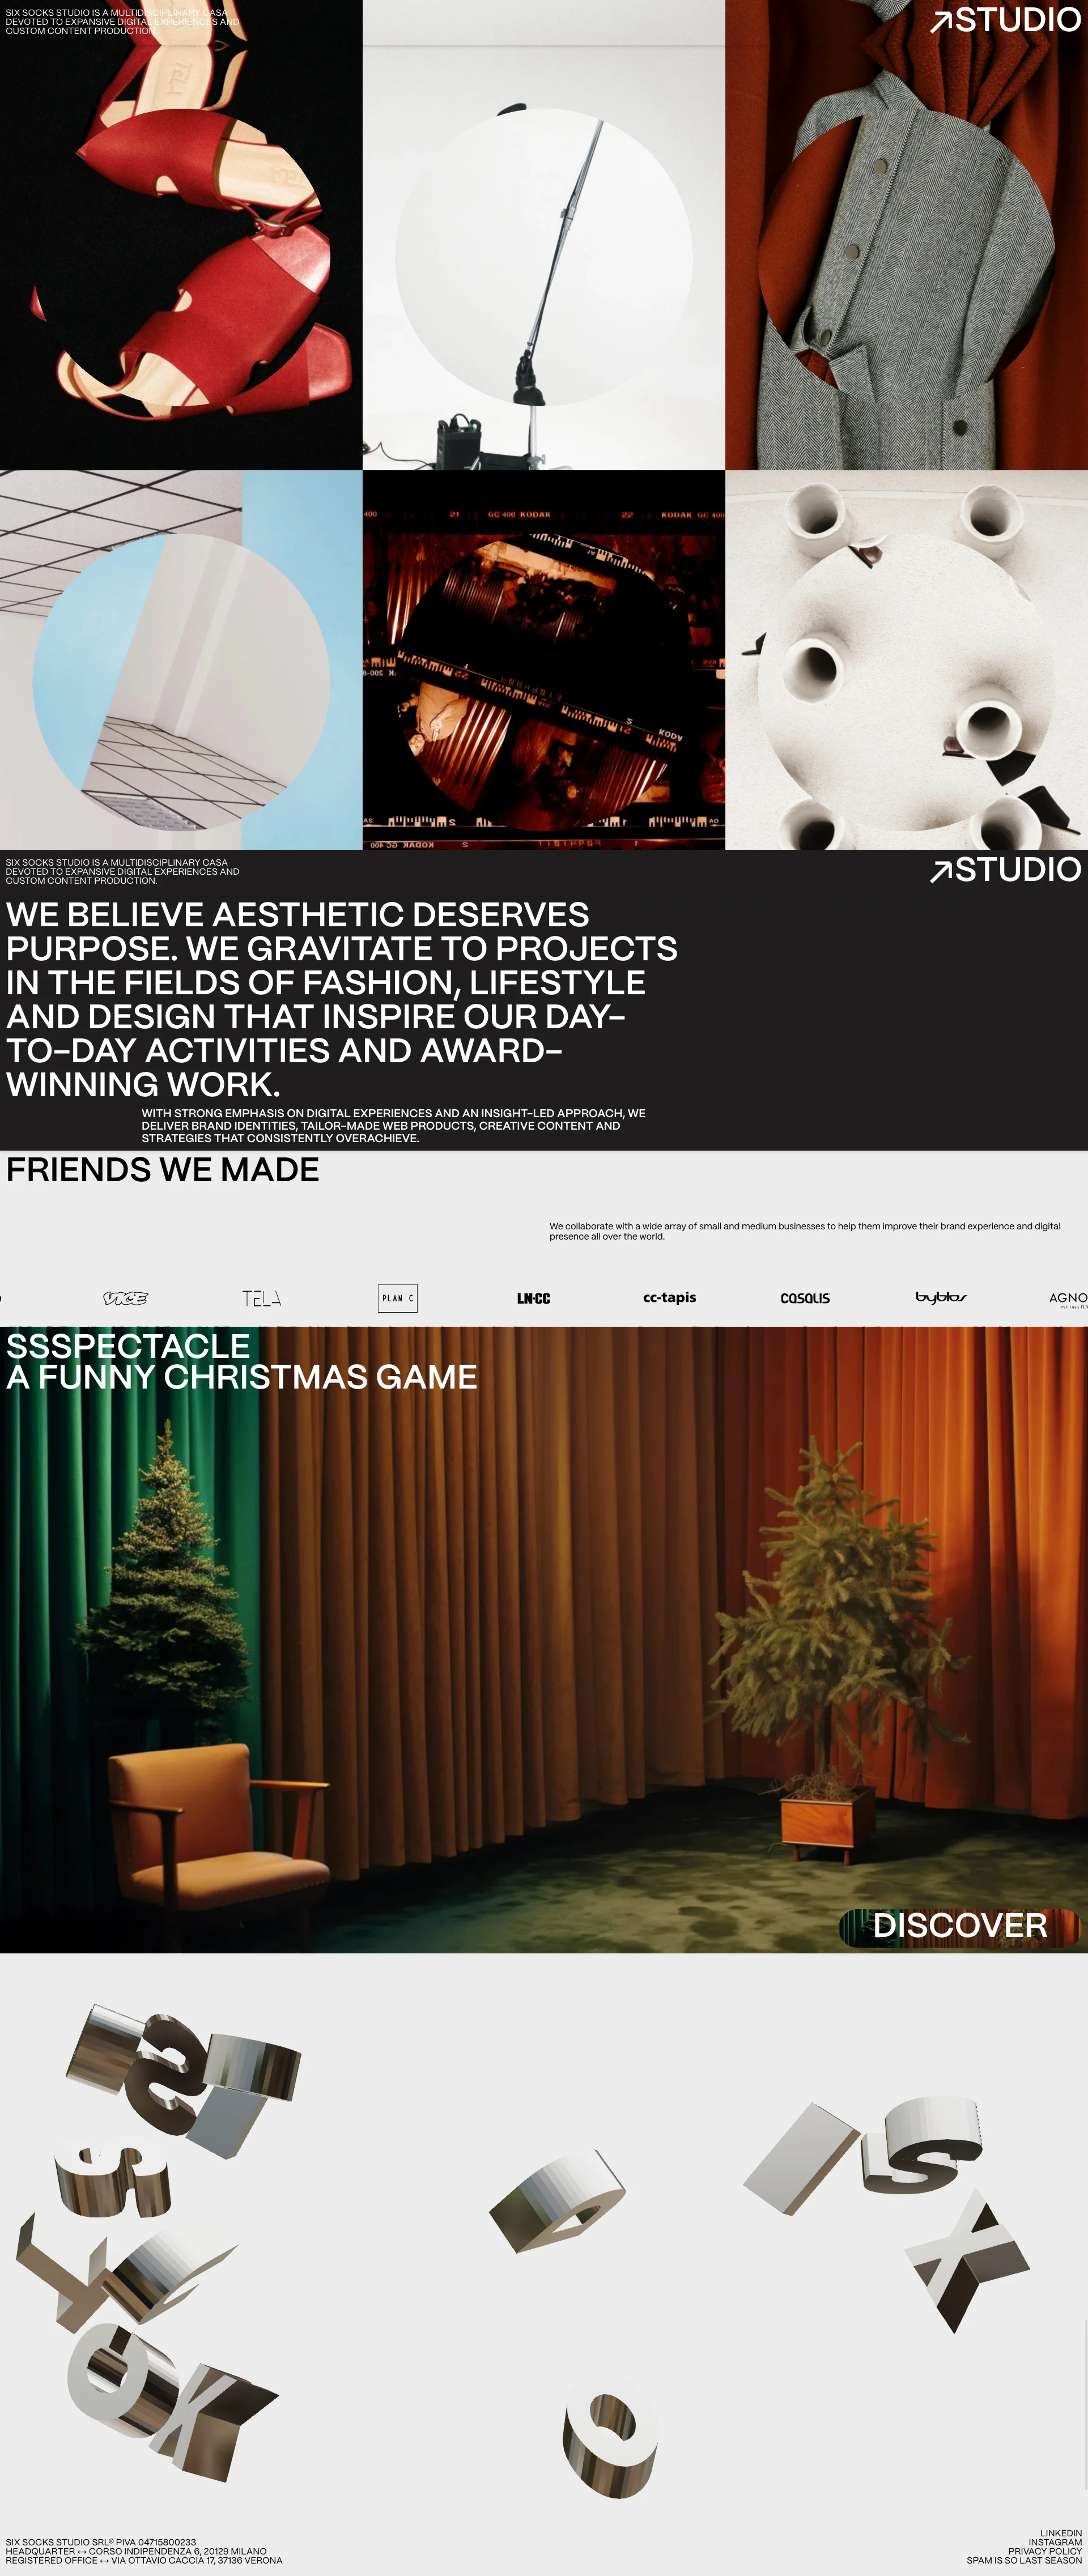 Six Socks Studio Landing Page Example: Six Socks Studio is a multidisciplinary casa devoted to expansive digital experiences and custom content production.